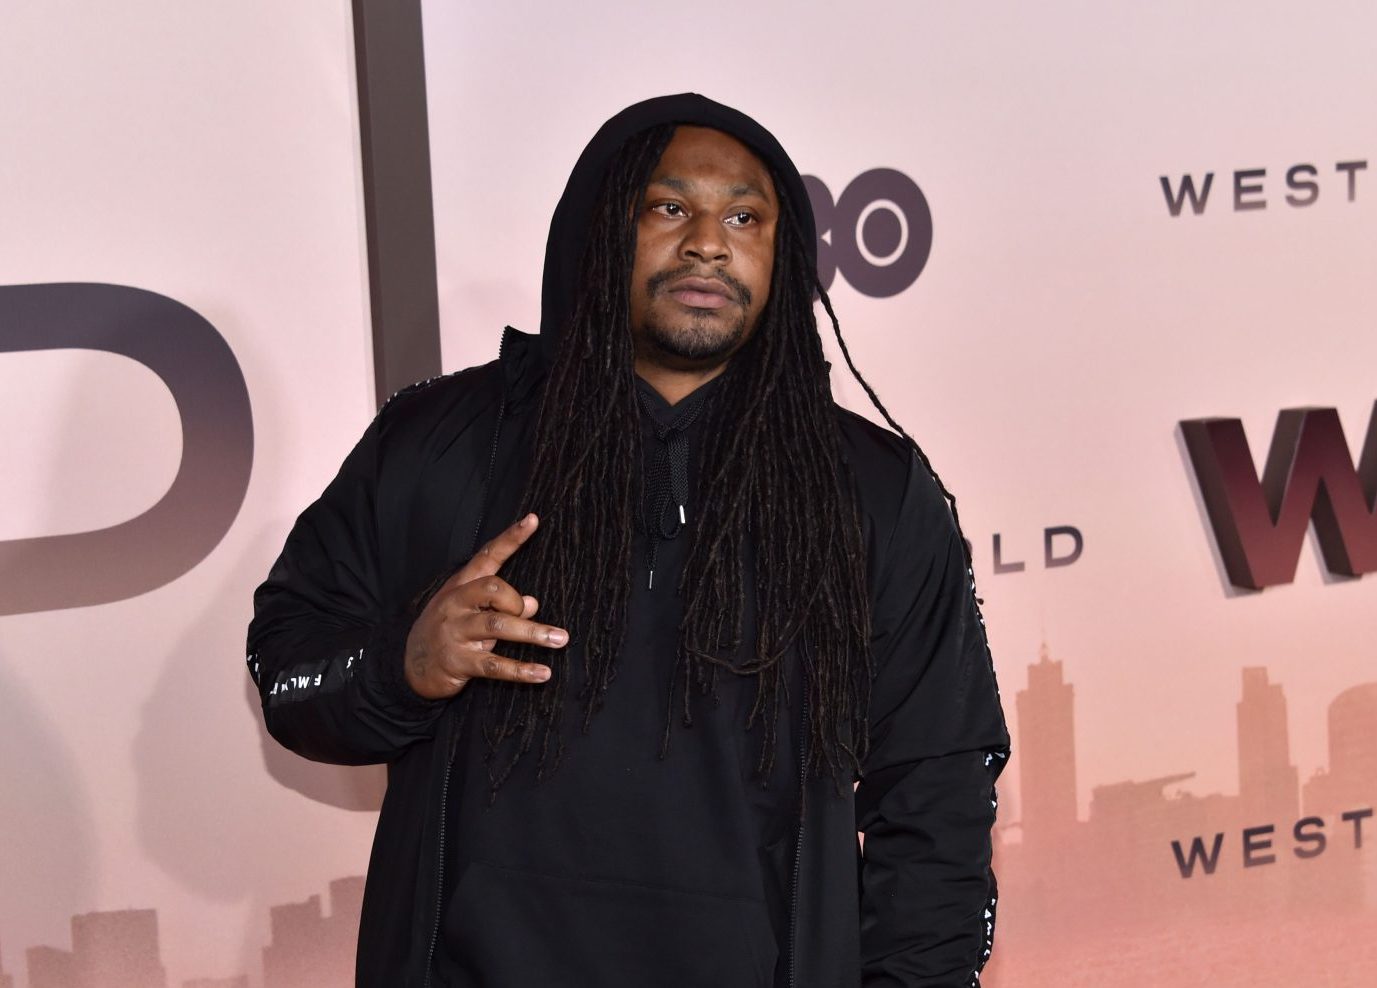 Marshawn Lynch Arrested For Dui In Las Vegas Photos Show His Vehicle With Missing Flat Tires